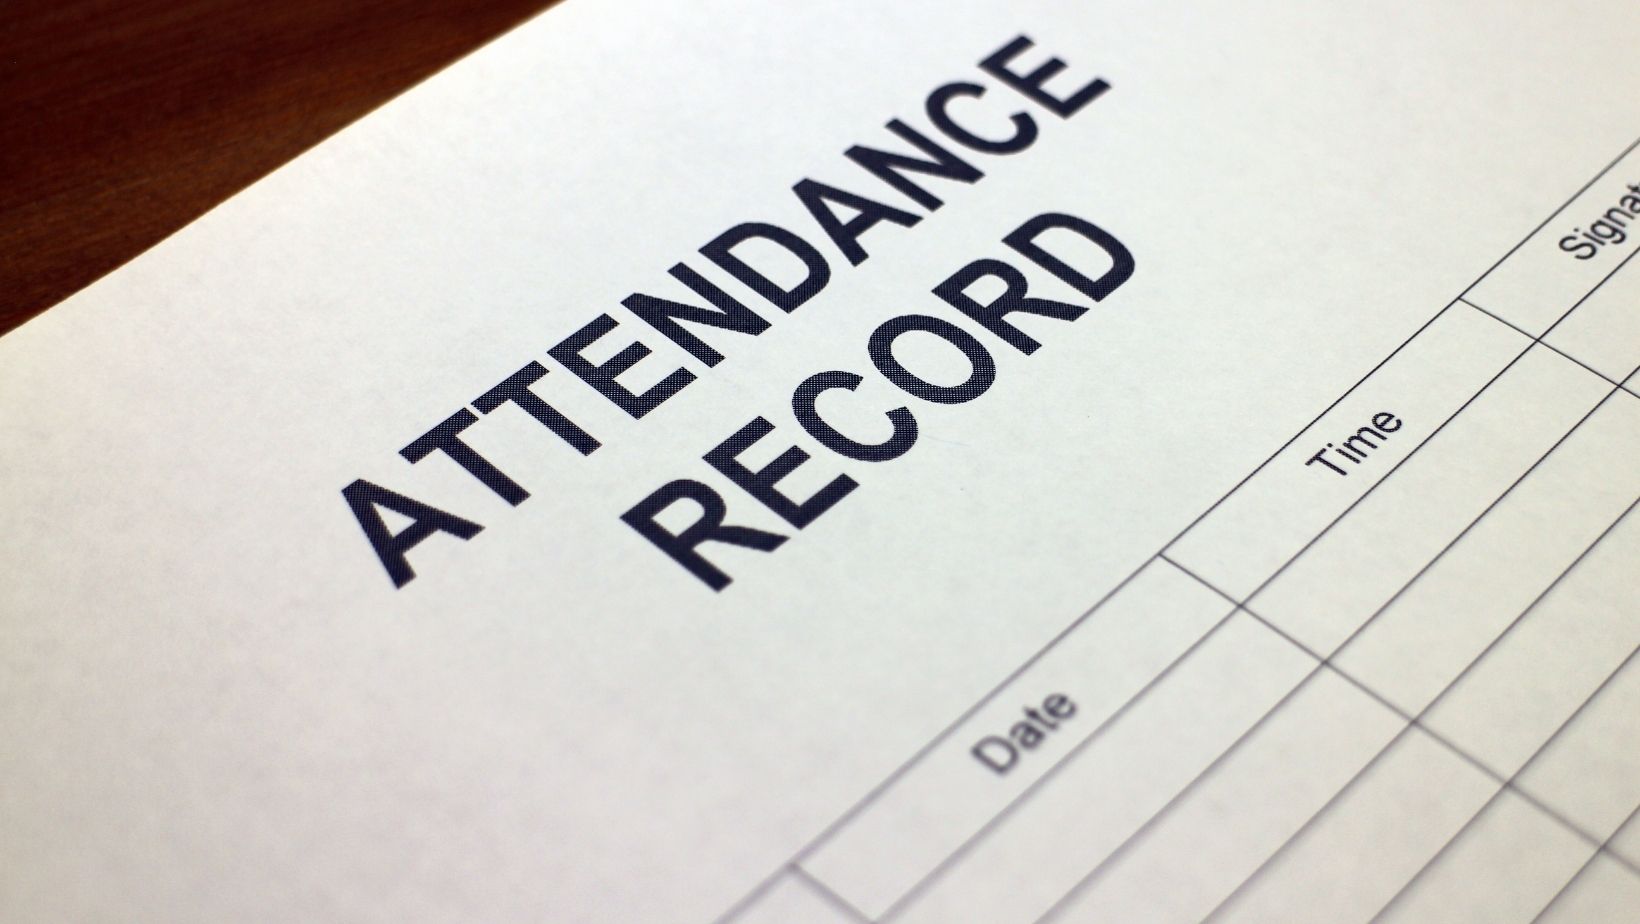 is attendance truly important? defend your answer with an explanation.